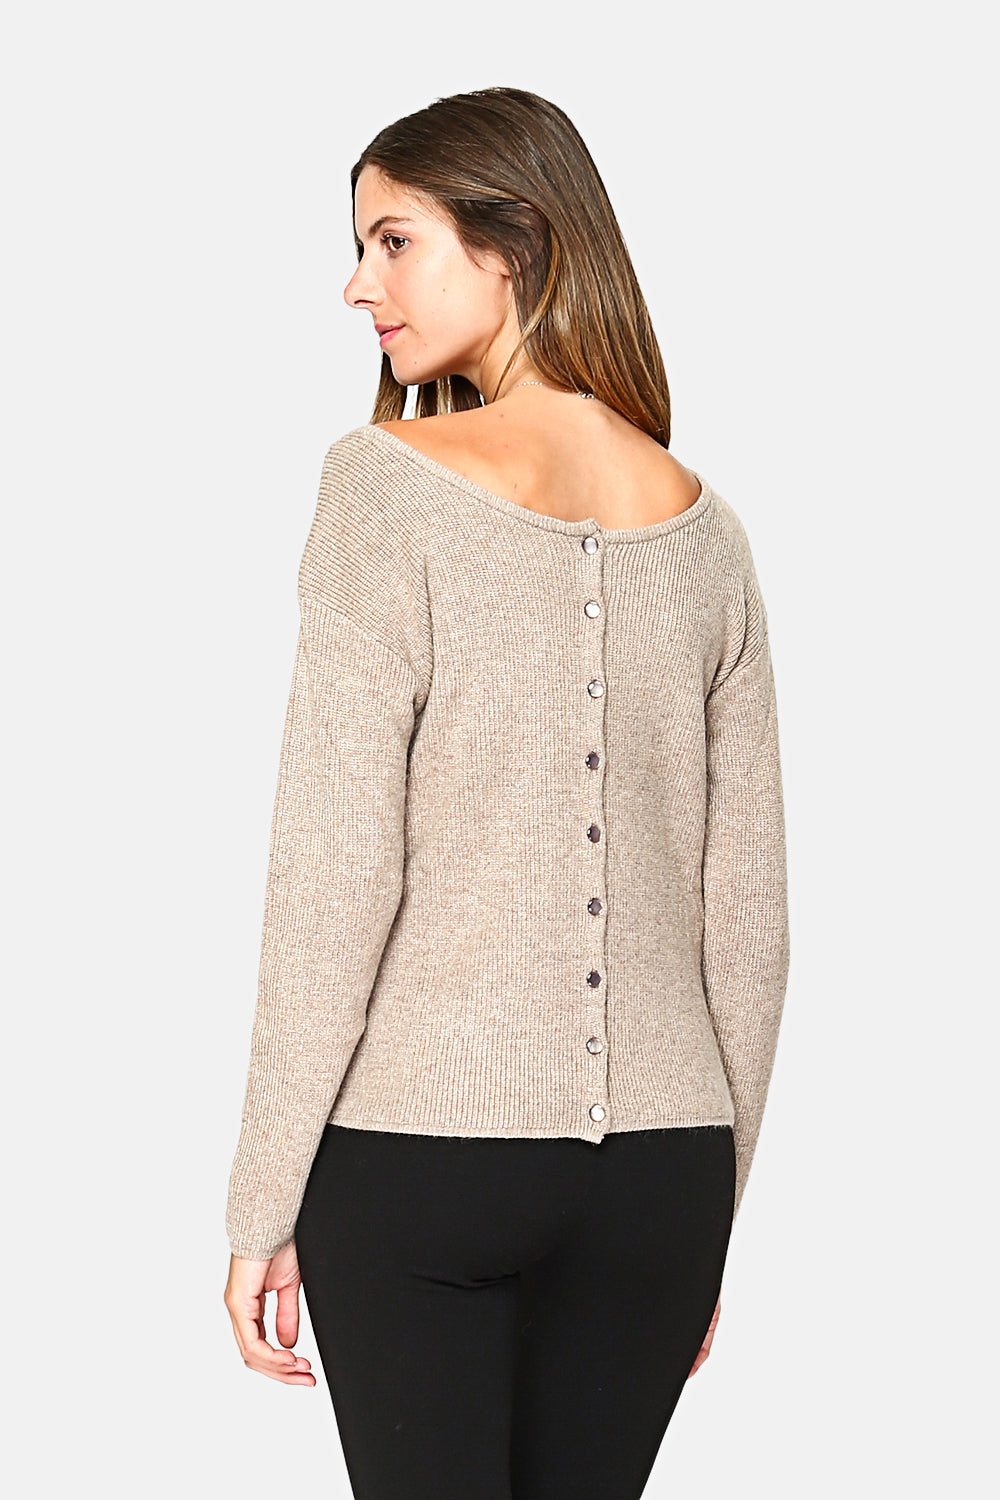 Pearl buttoned cardigan to wear in two ways